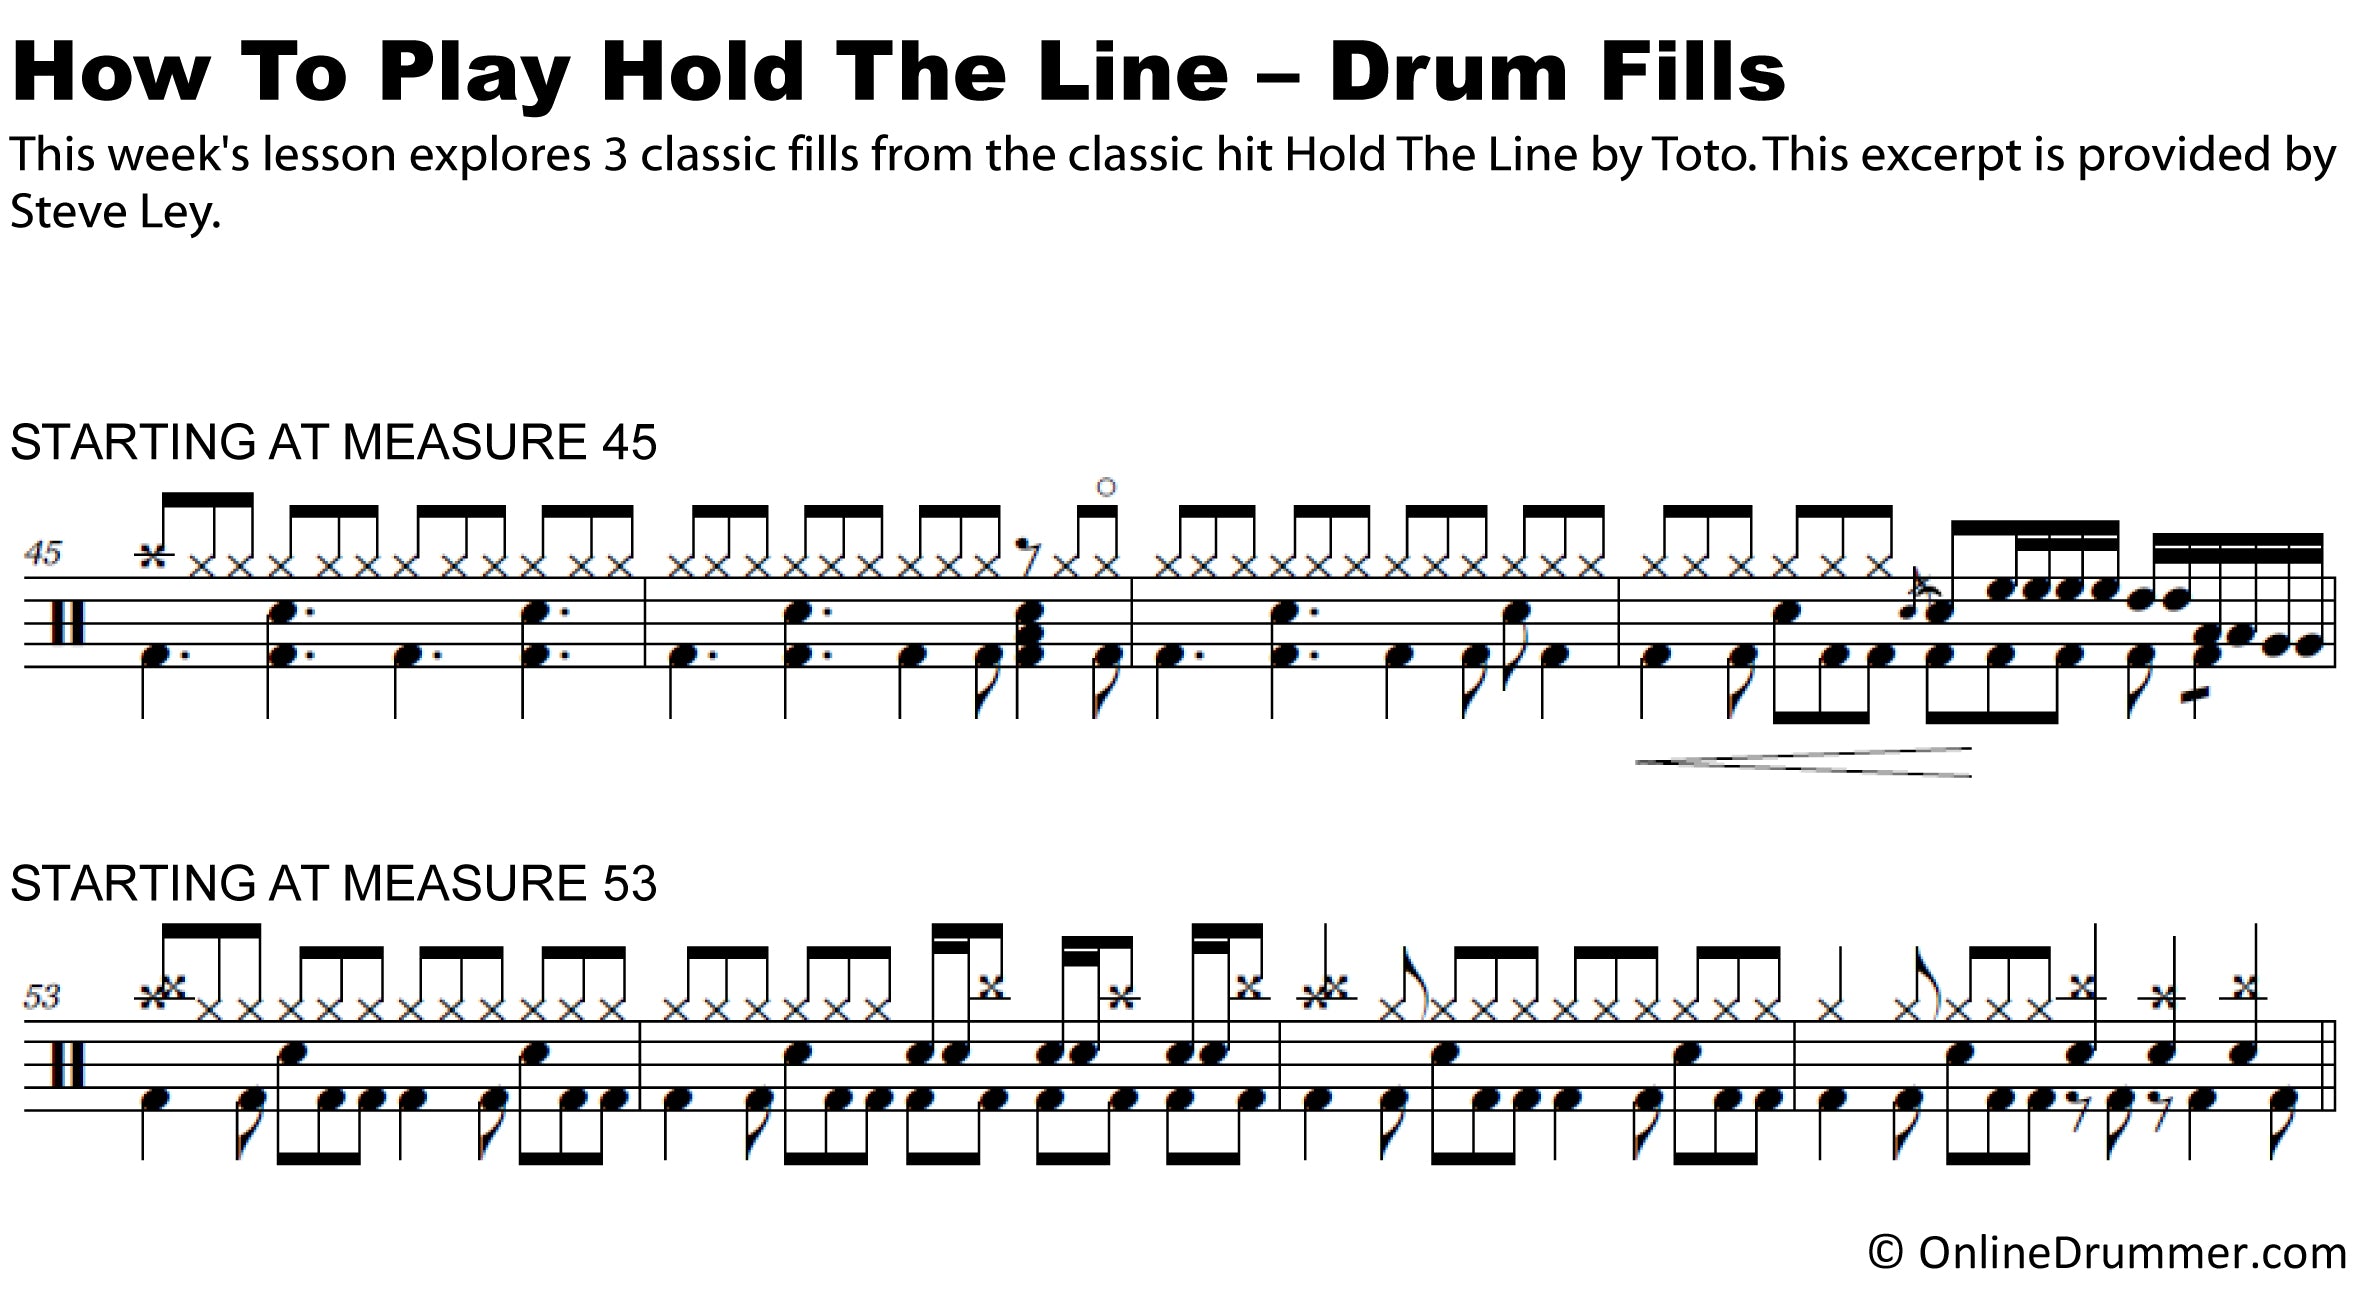 Drum notation for the "How to Play Hold the Line by Toto Drum Fills" drum lesson.